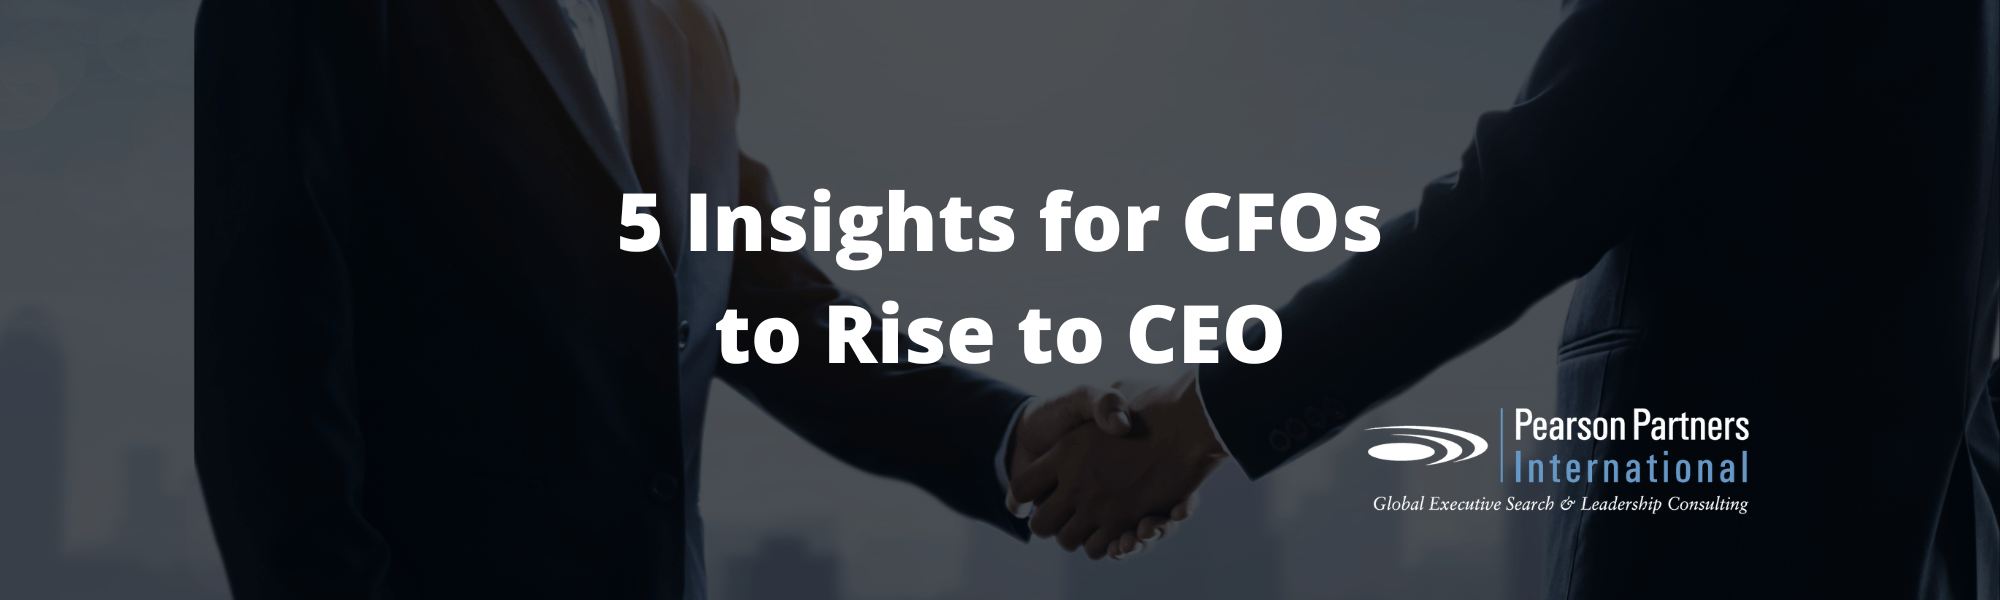 Header image of two executives shaking hands with the words 5 Insights for CFOs to Rise to CEO